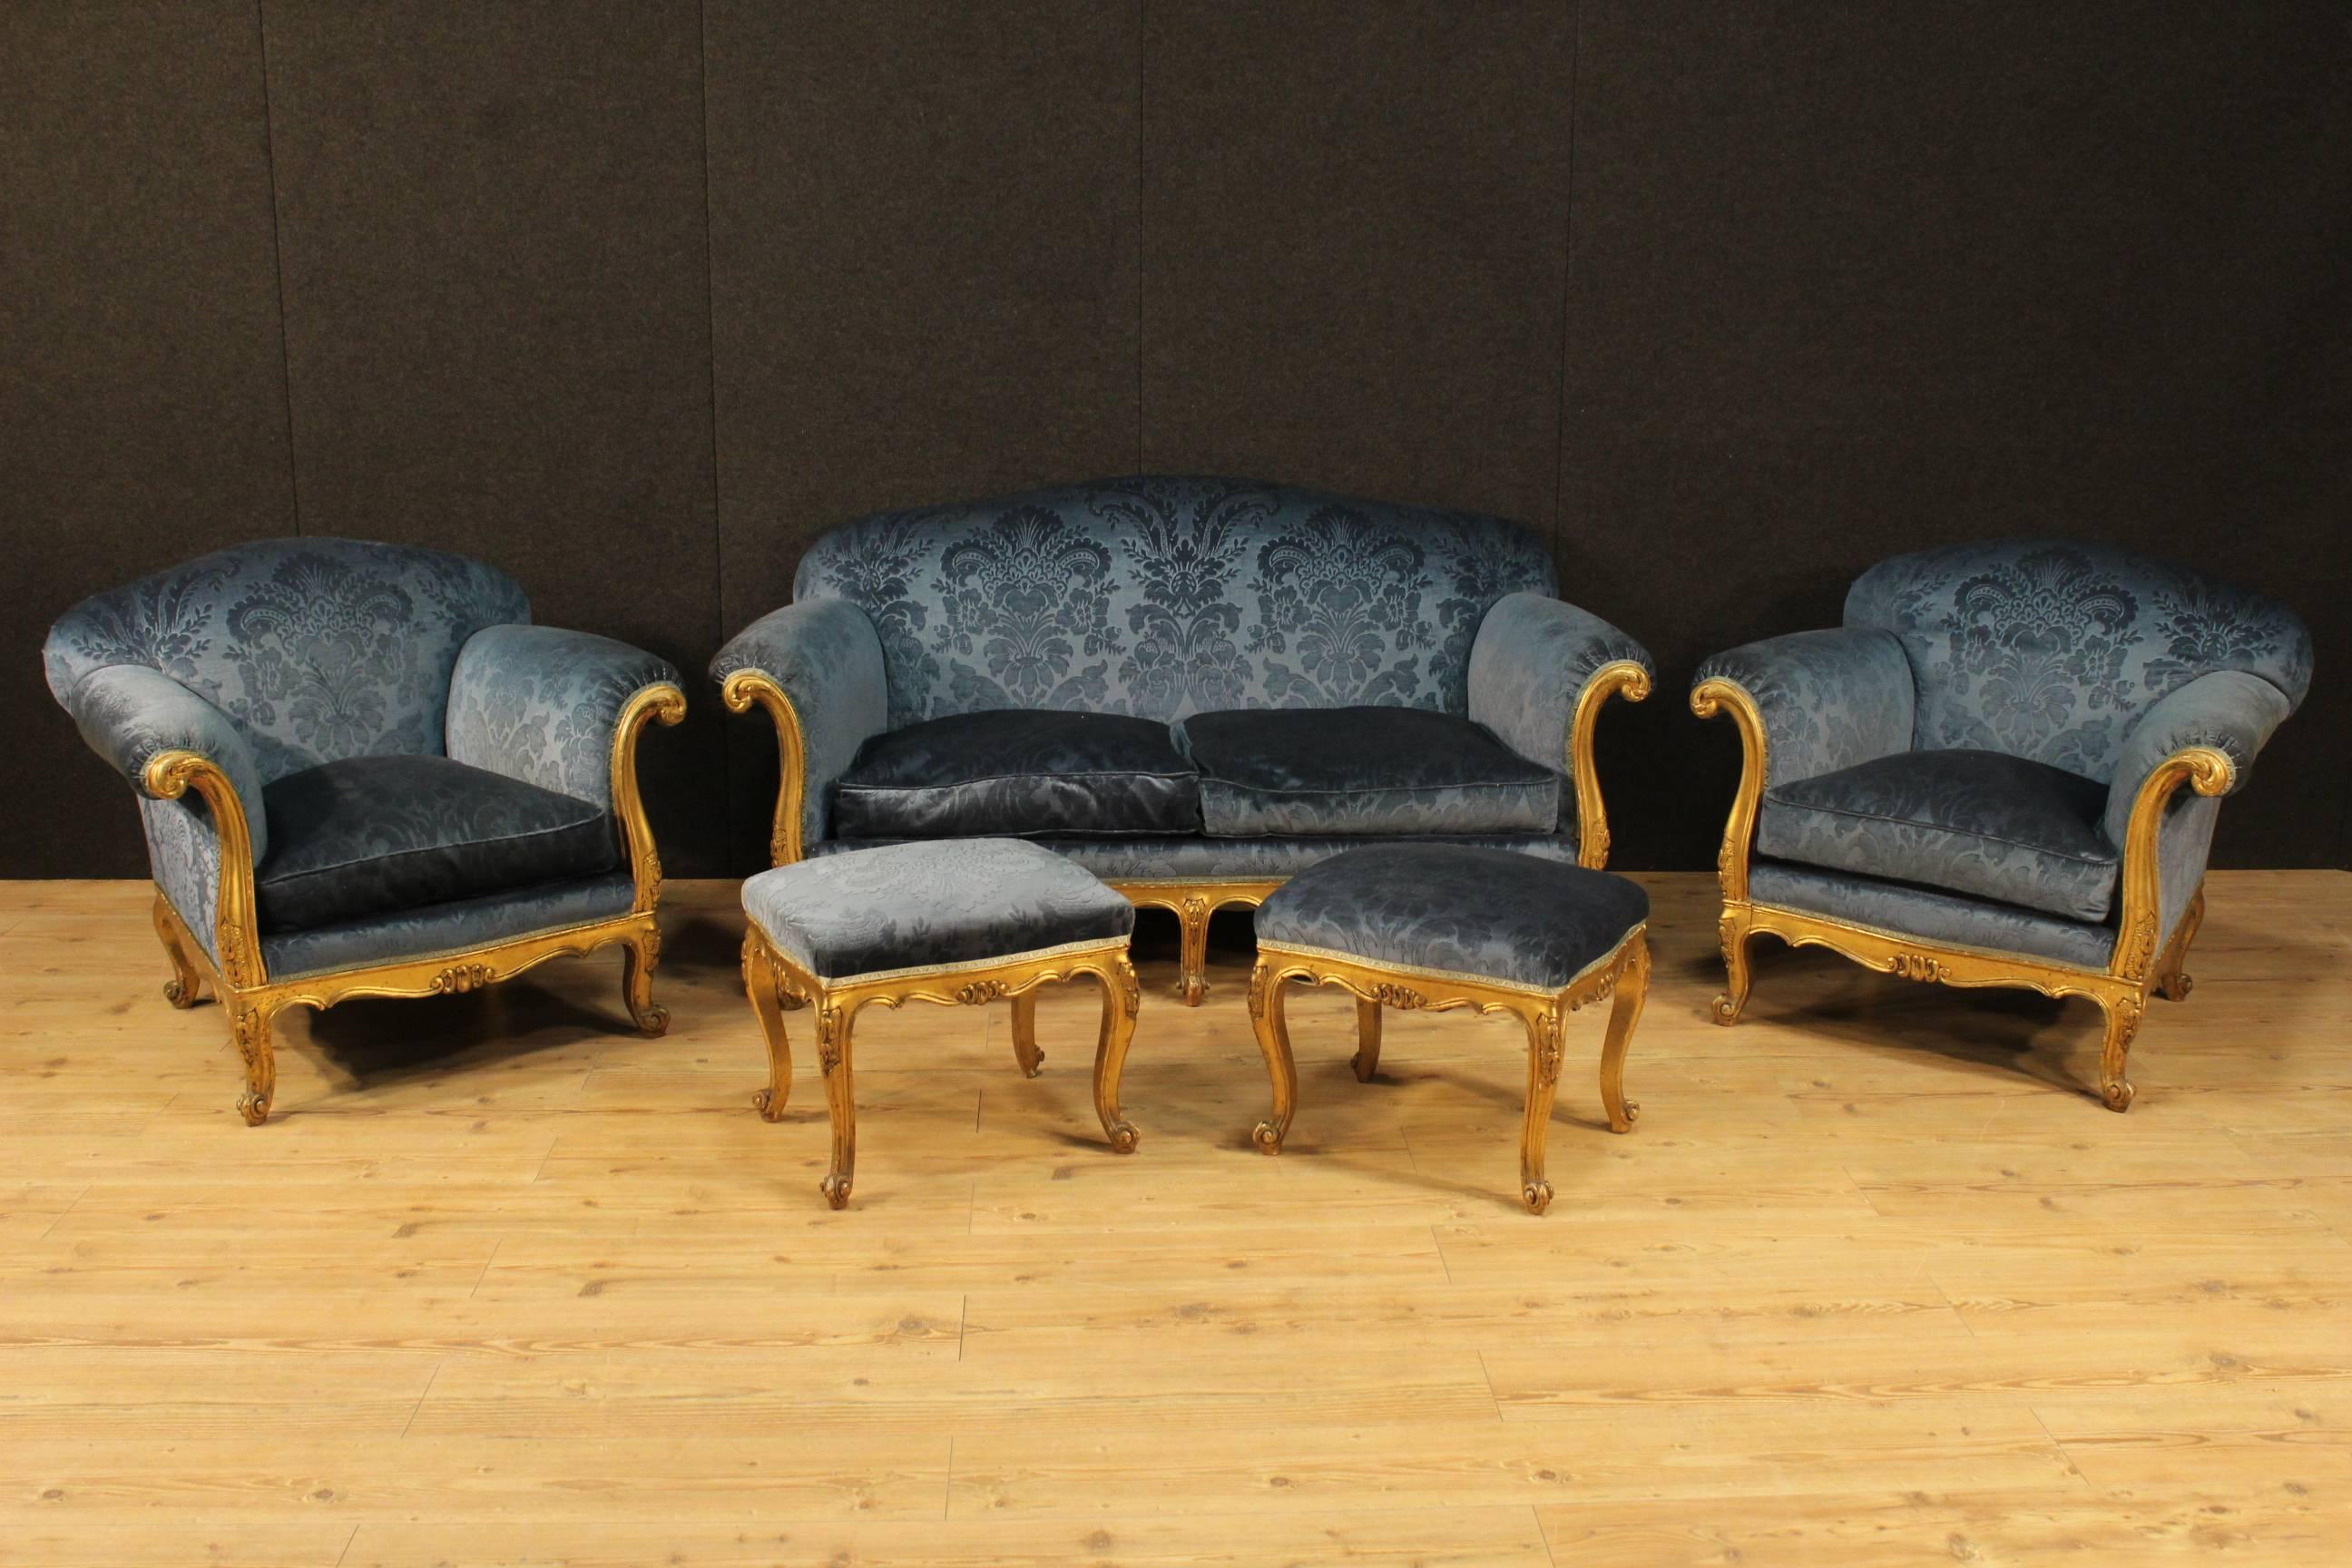 Beautiful pair of French footstools of the 20th century. Furniture in richly carved and gilded wood, of beautiful line and good taste. Stools upholstered in blue damask velvet in good condition with some small signs of wear. Footstools of good